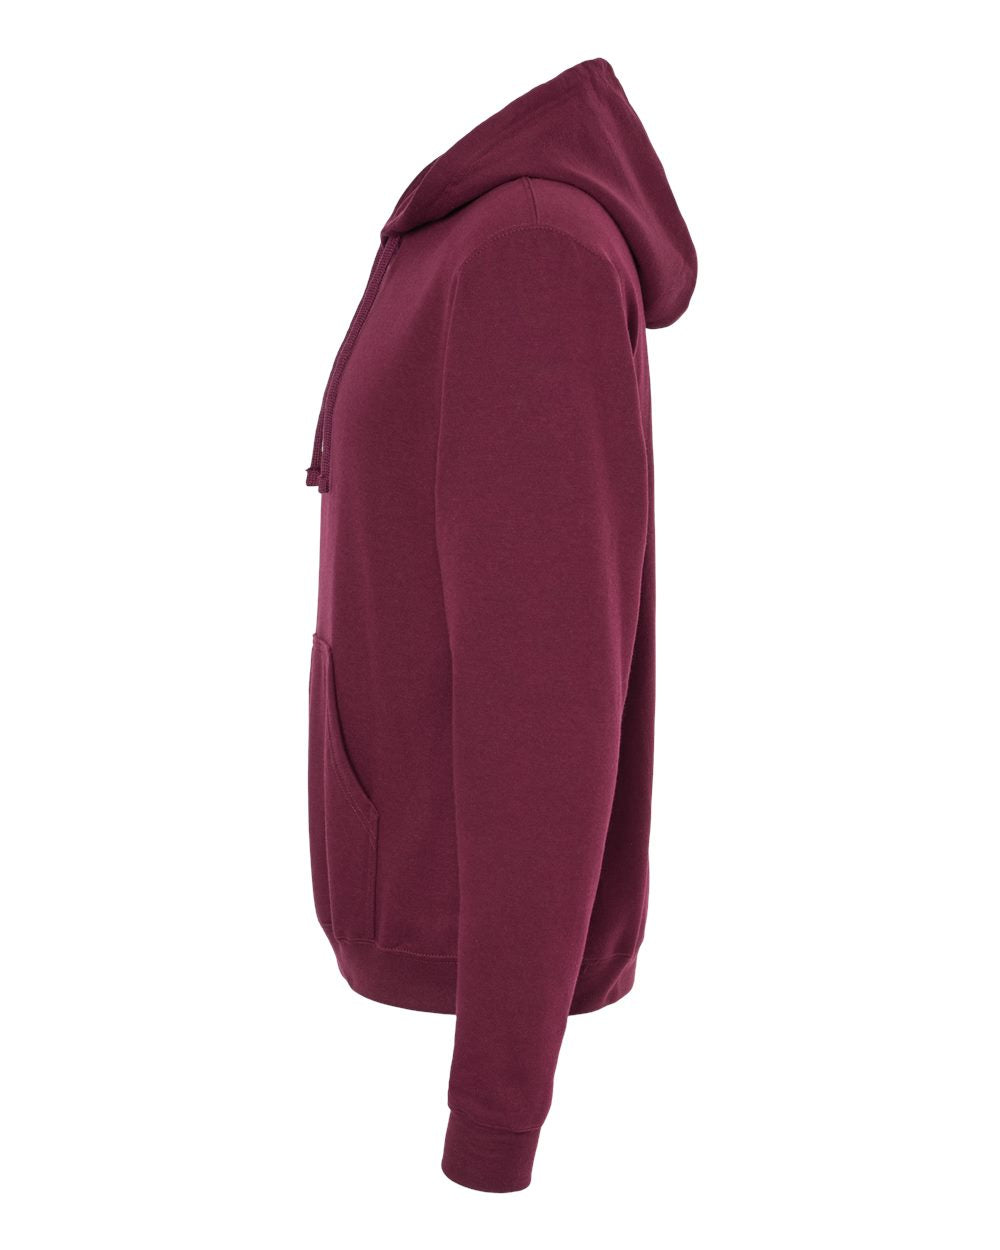 M&O Unisex Pullover Hoodie 3320 #color_Maroon